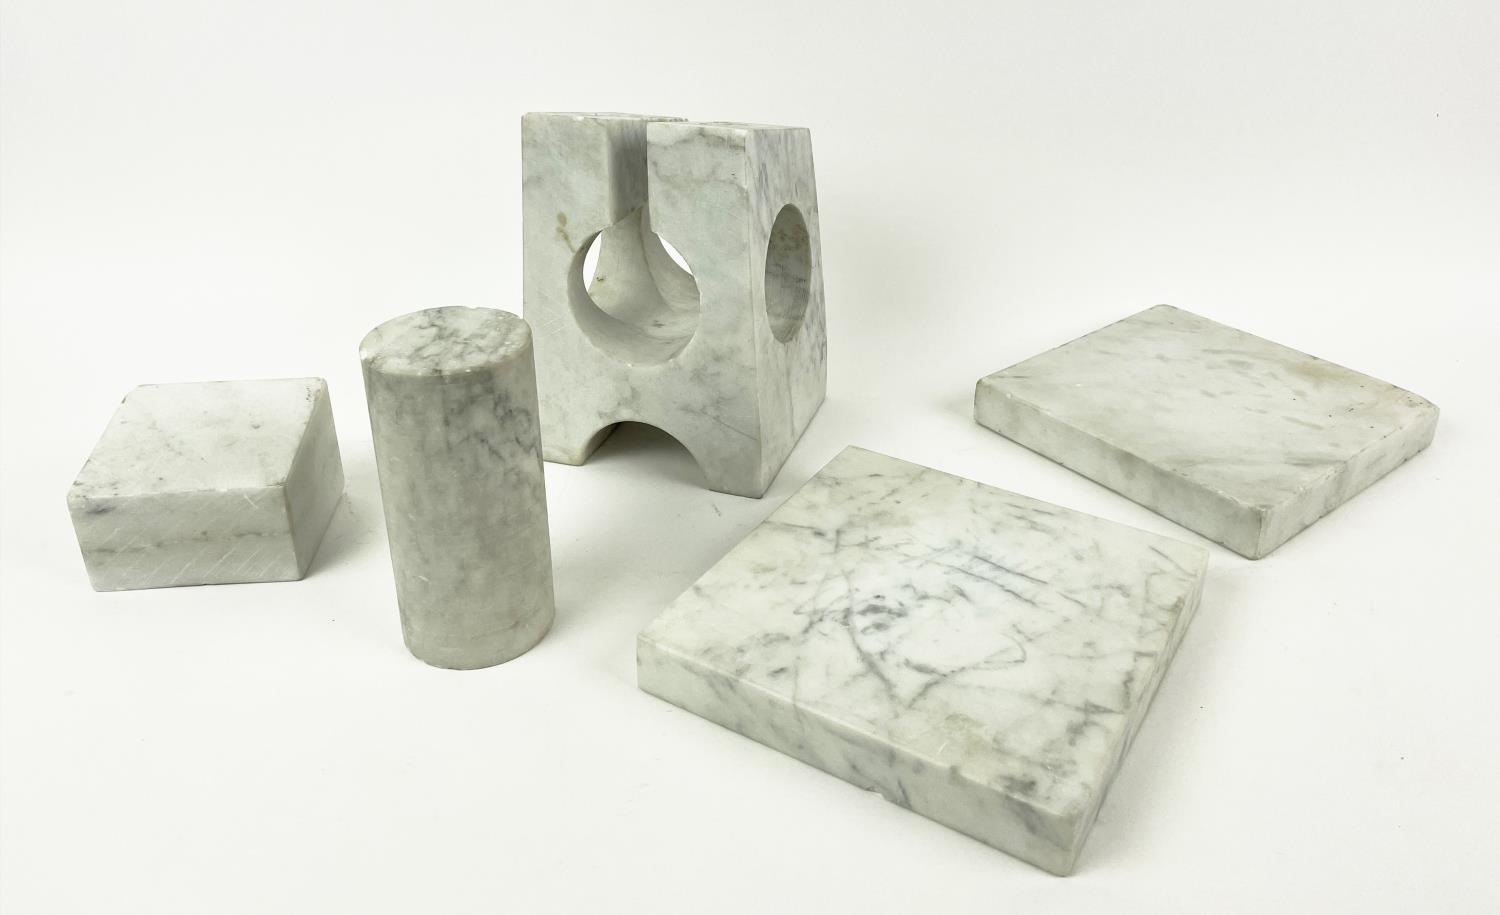 SCULPTURE, marble of adaptable building block form, unknown artist, approx 35cm H x 20cm D x 20cm W. - Image 2 of 5